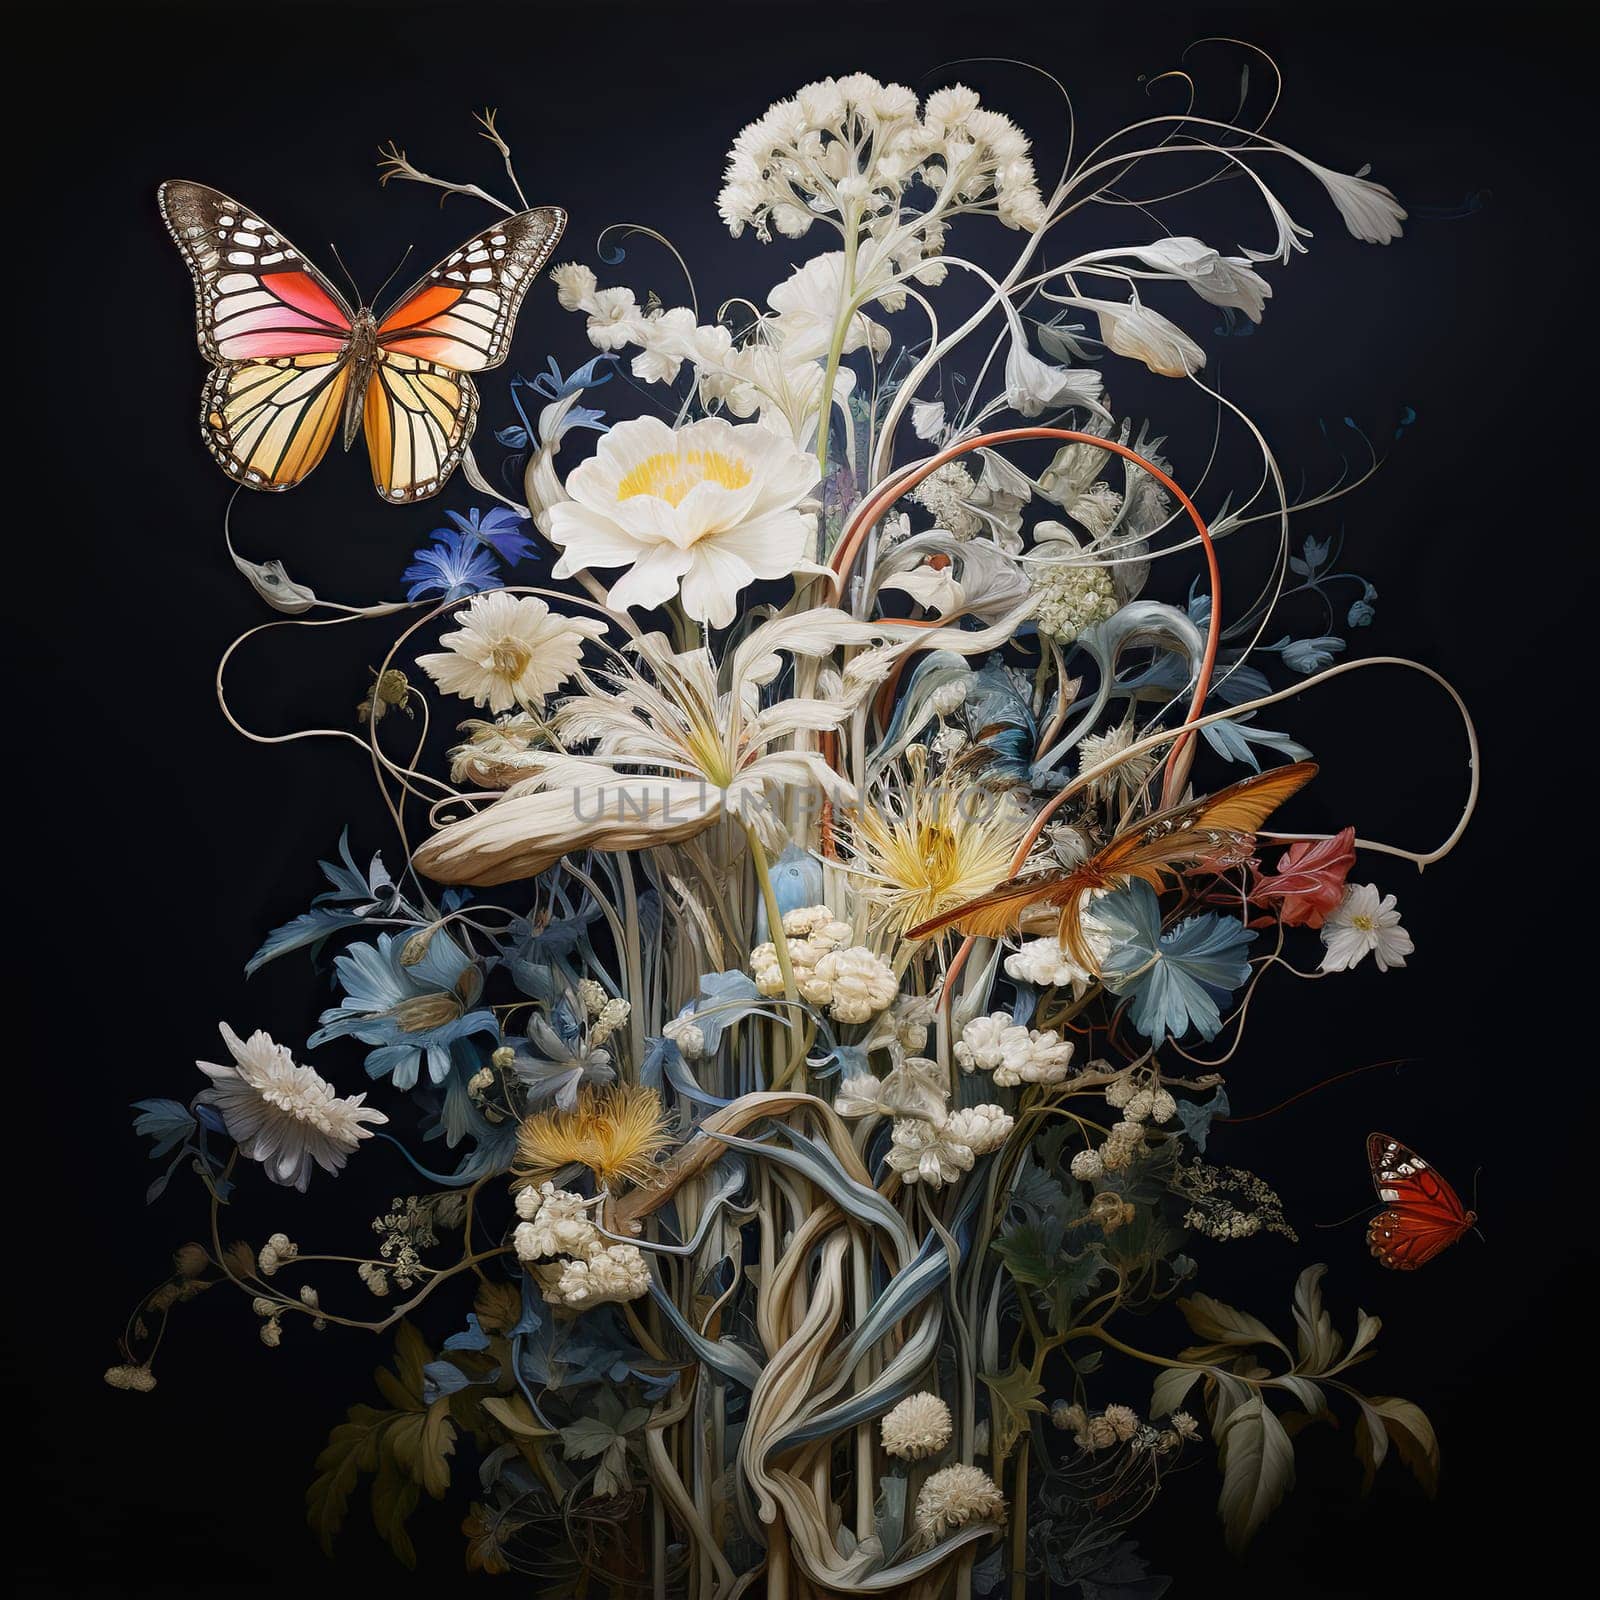 Art. Still life of a bouquet of flowers with butterflies on a black background.